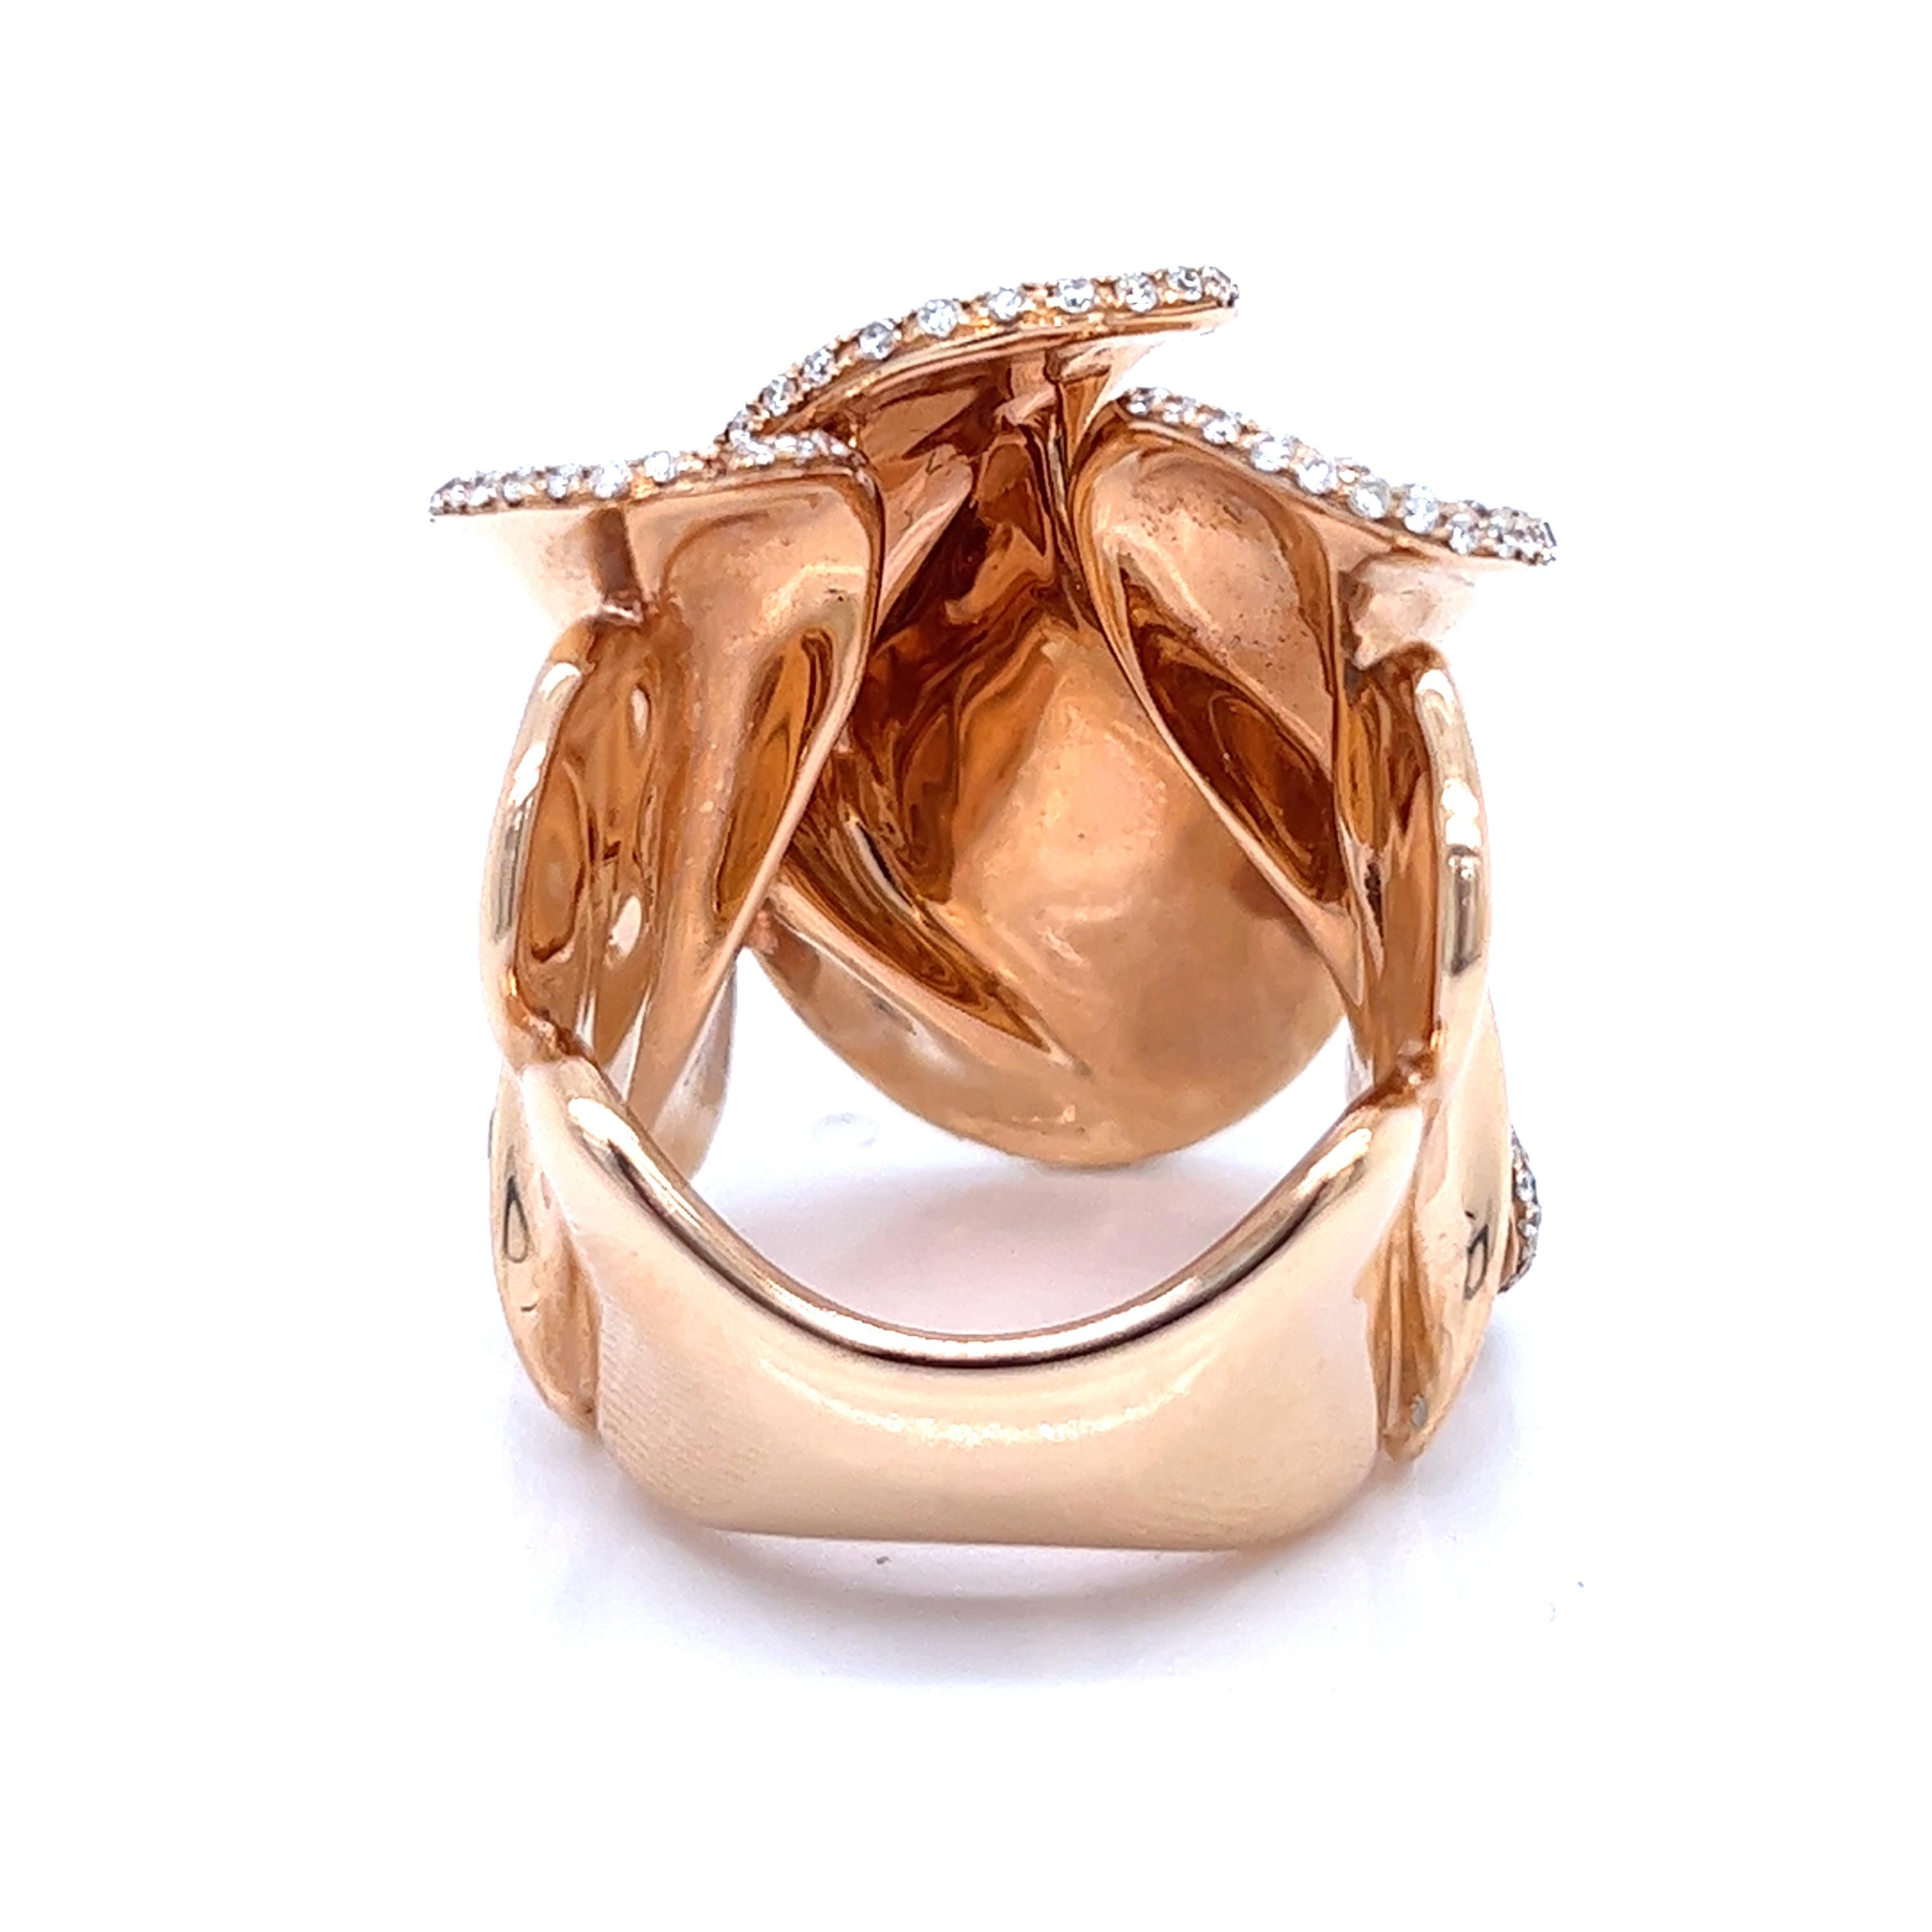 This exquisite Wave Freeform ring, meticulously crafted in Italy from lustrous 18kt rose gold, gracefully encircles your finger with a shimmering embrace. Adorned with a lavish ensemble of diamonds, their collective weight reaching a mesmerizing